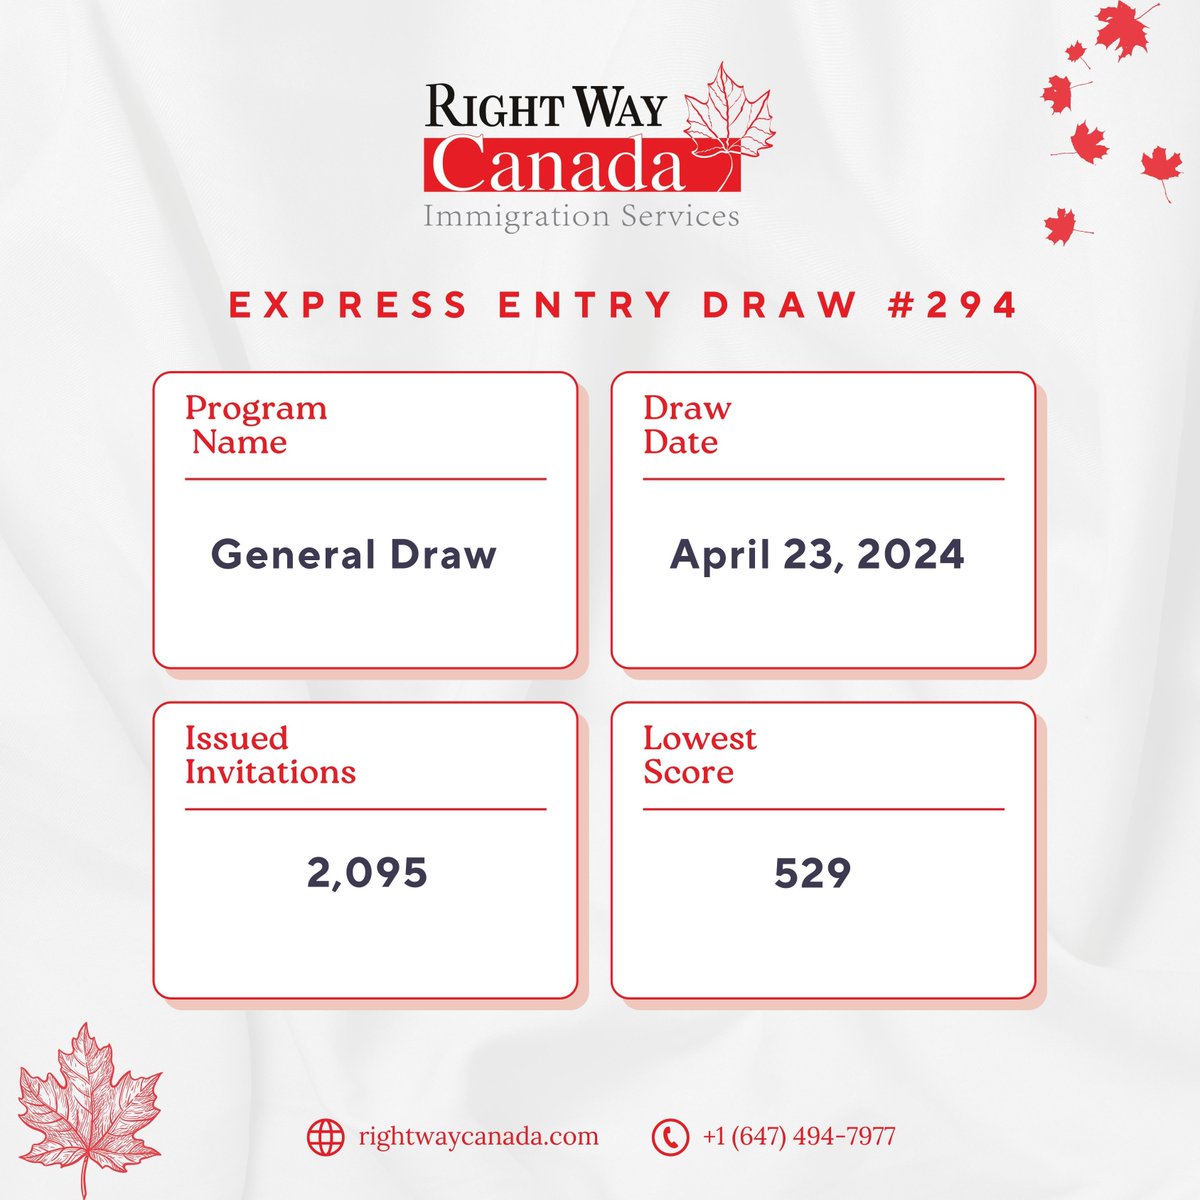 NEW DRAW ANNOUNCEMENT: A new round of invitations has been sent to qualifying candidates in the Express Entry pool! 

 #Canada #CanadaVisaConsultant  #PRcanada #IRCC #PermanentResidency #ImmigrationConsultant  #ExpressEntry #ExpressEntryCanada #ExpressEntryDraw